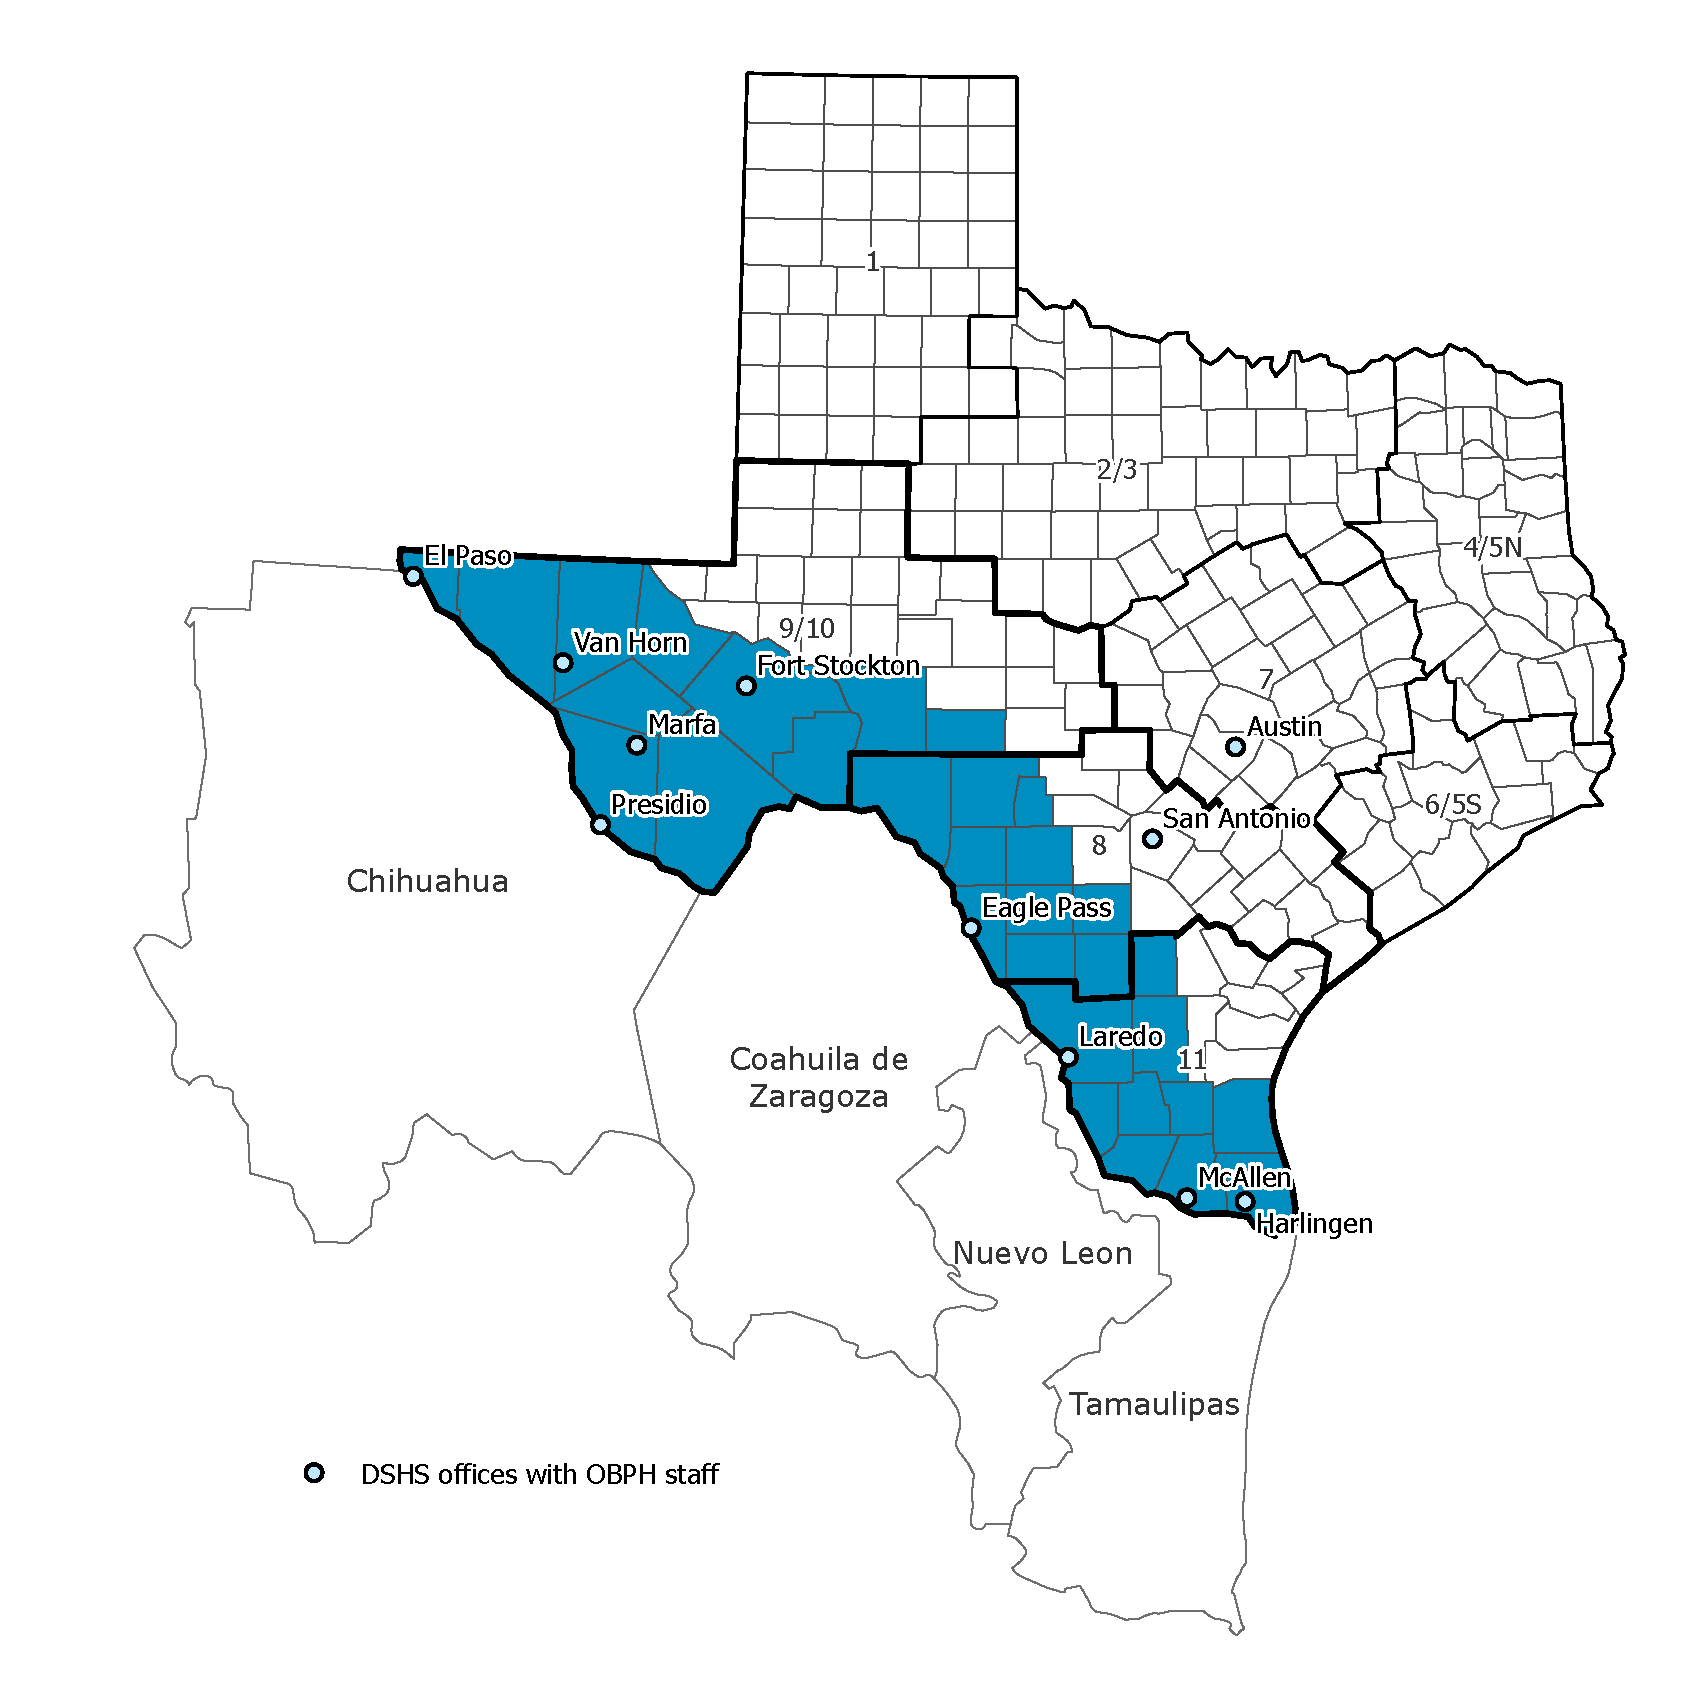 "A map highlights DSHS offices, Texas counties and Mexican states along the Texas-Mexico border"